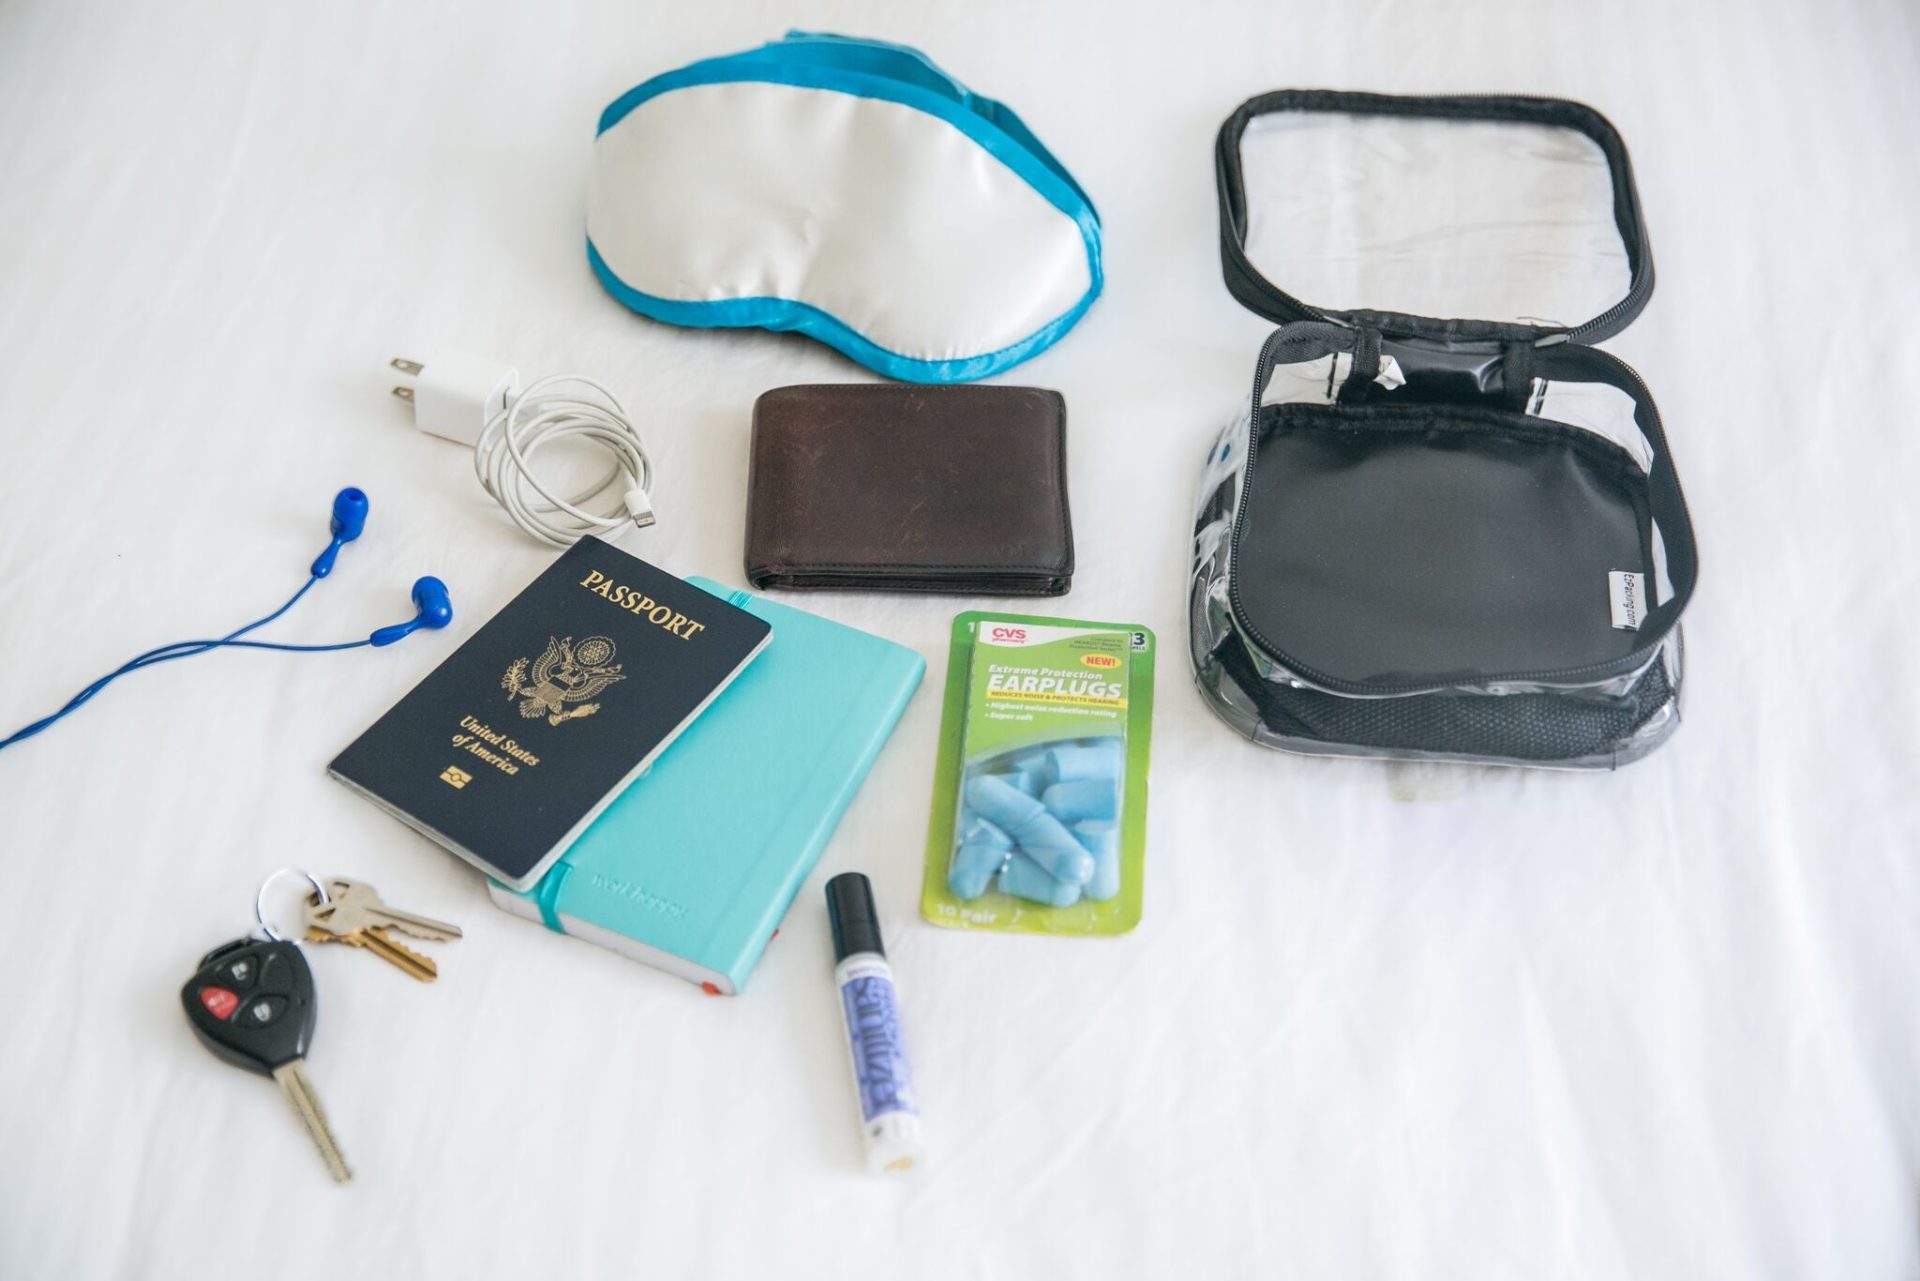 Extra small cube with passport and other travel valuables